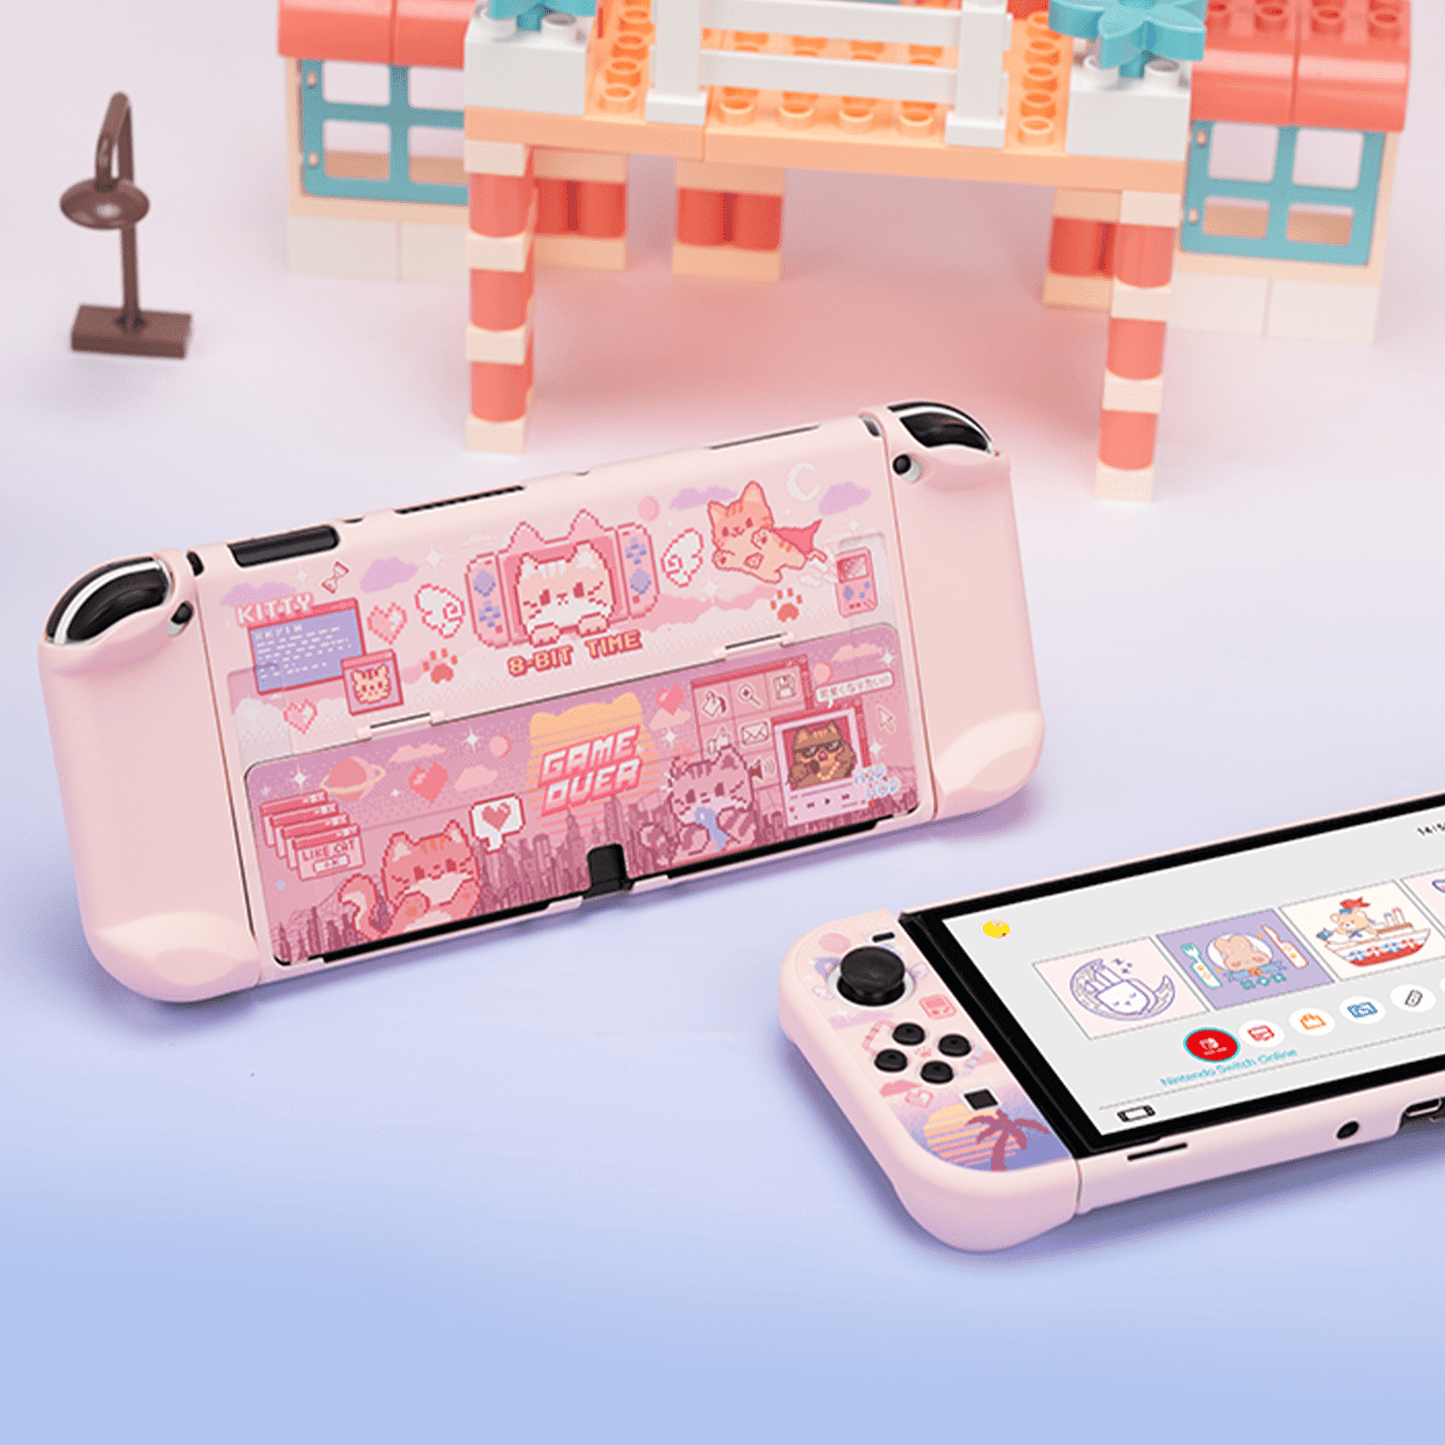 GeekShare Pixel cat Protective Case for Switch OLED